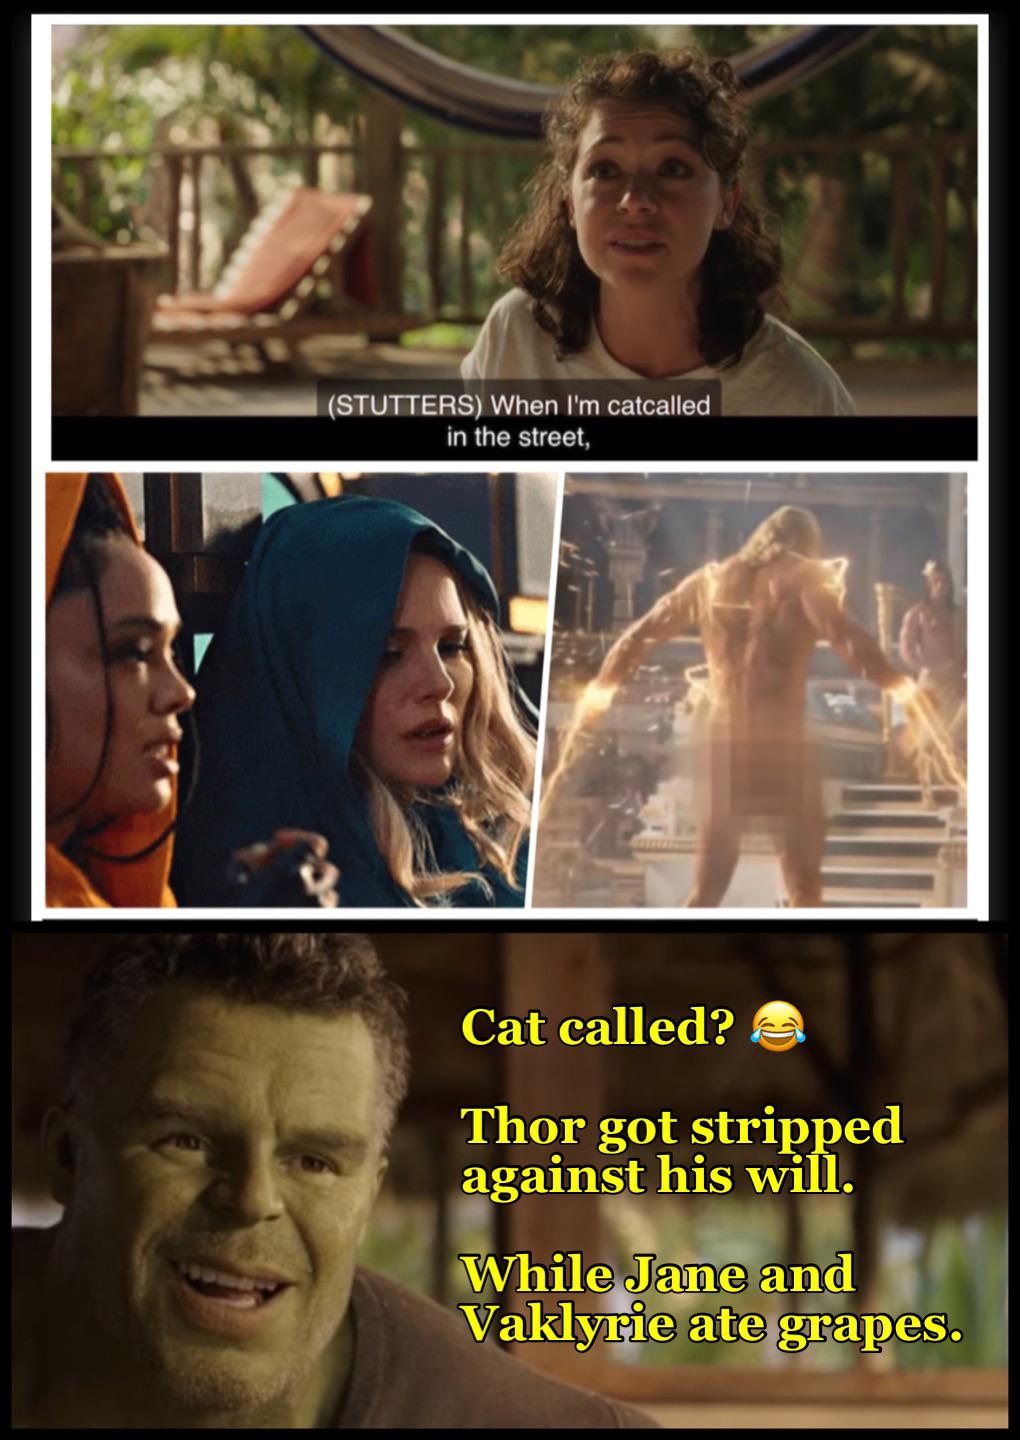 funny memes - photo caption - Stutters When I'm catcalled in the street, Cat called? Thor got stripped against his will. While Jane and Vaklyrie ate grapes.